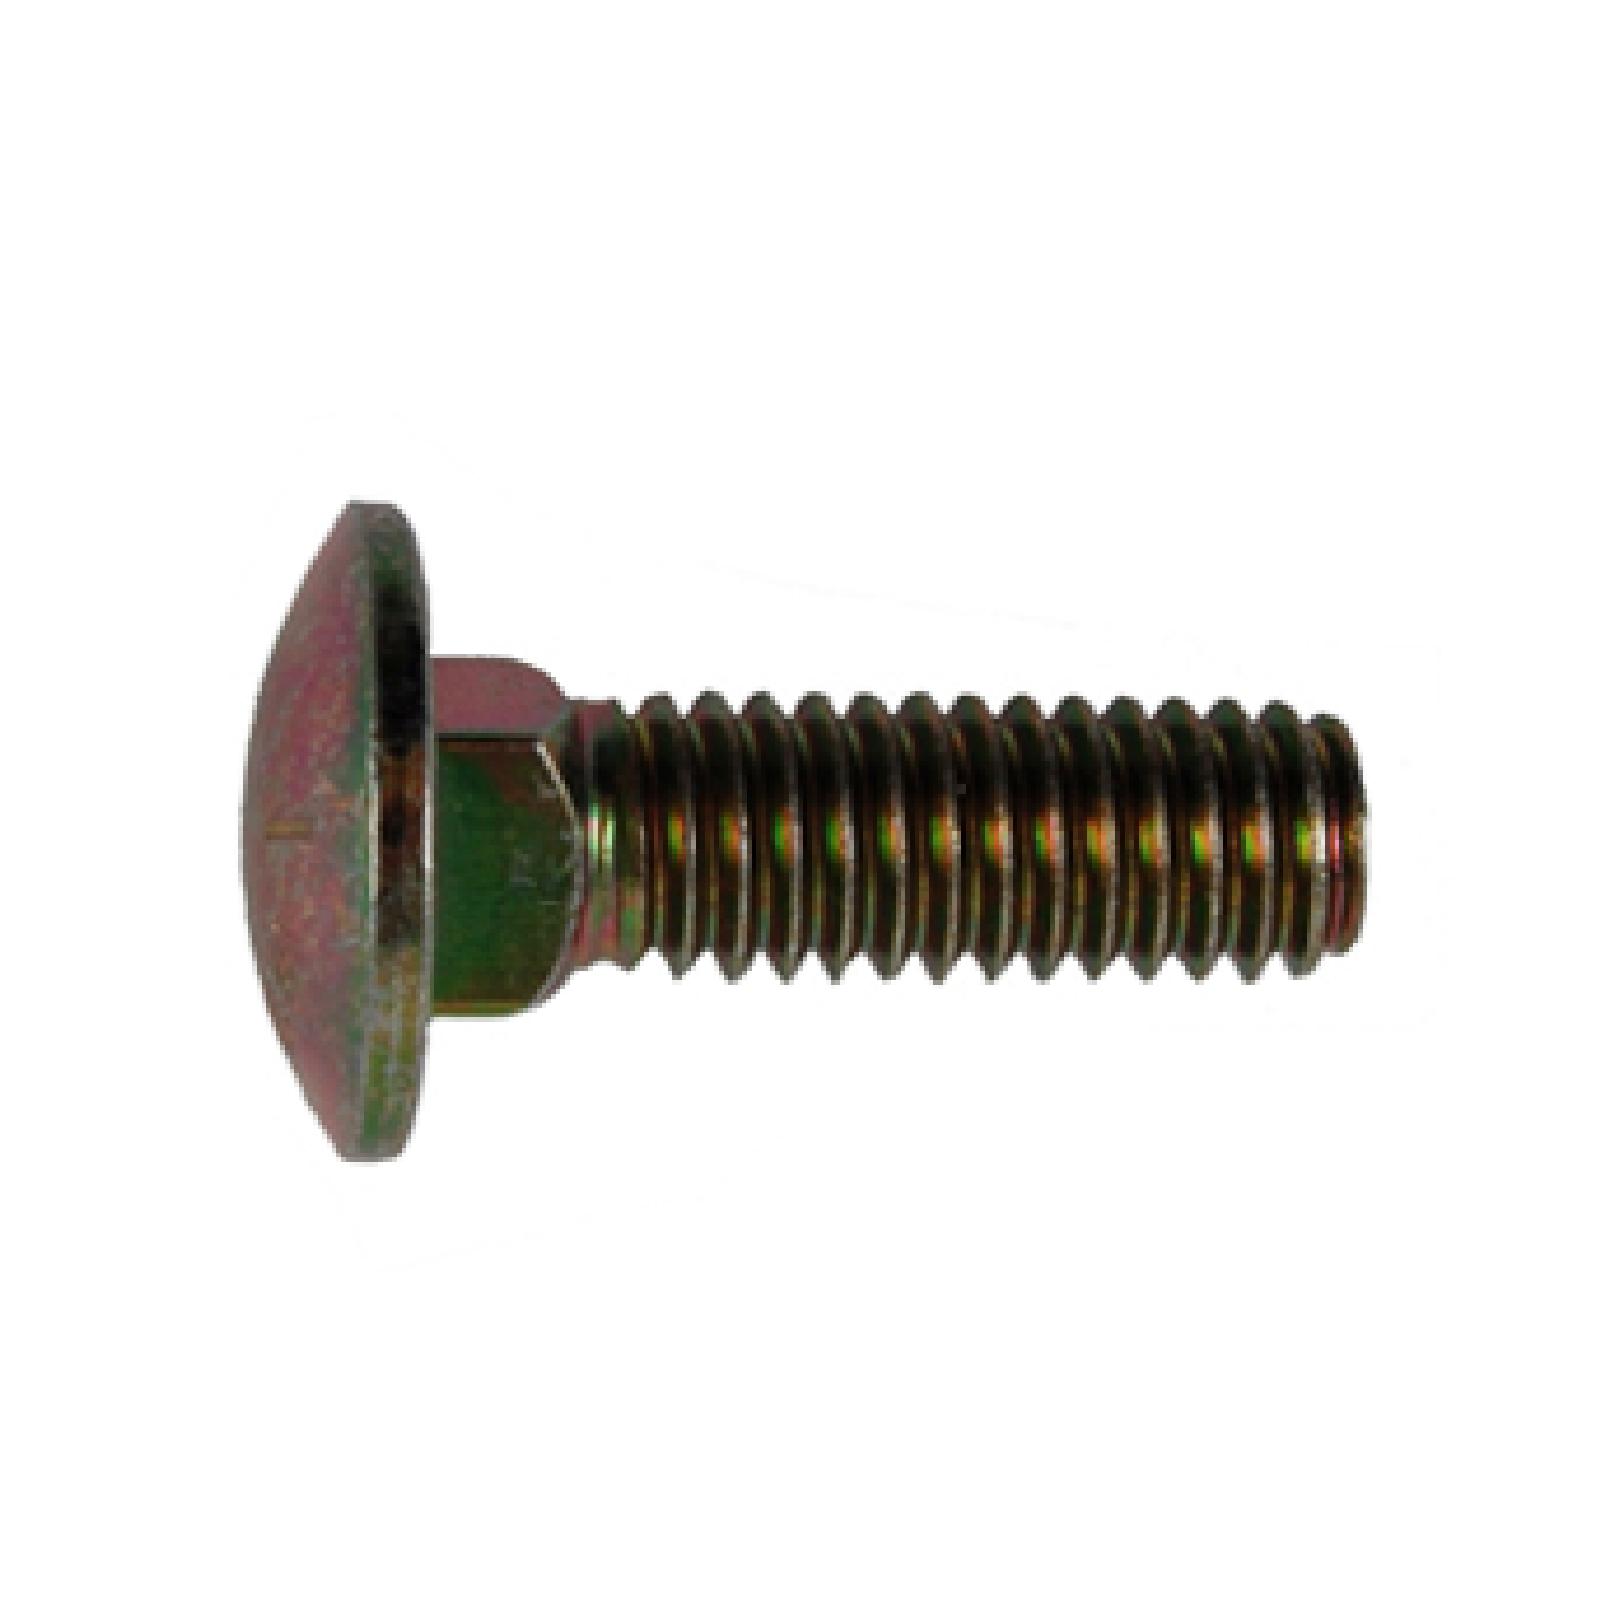 BOLT CARRIAGE 5/16 part# 710-0276 by MTD - Click Image to Close